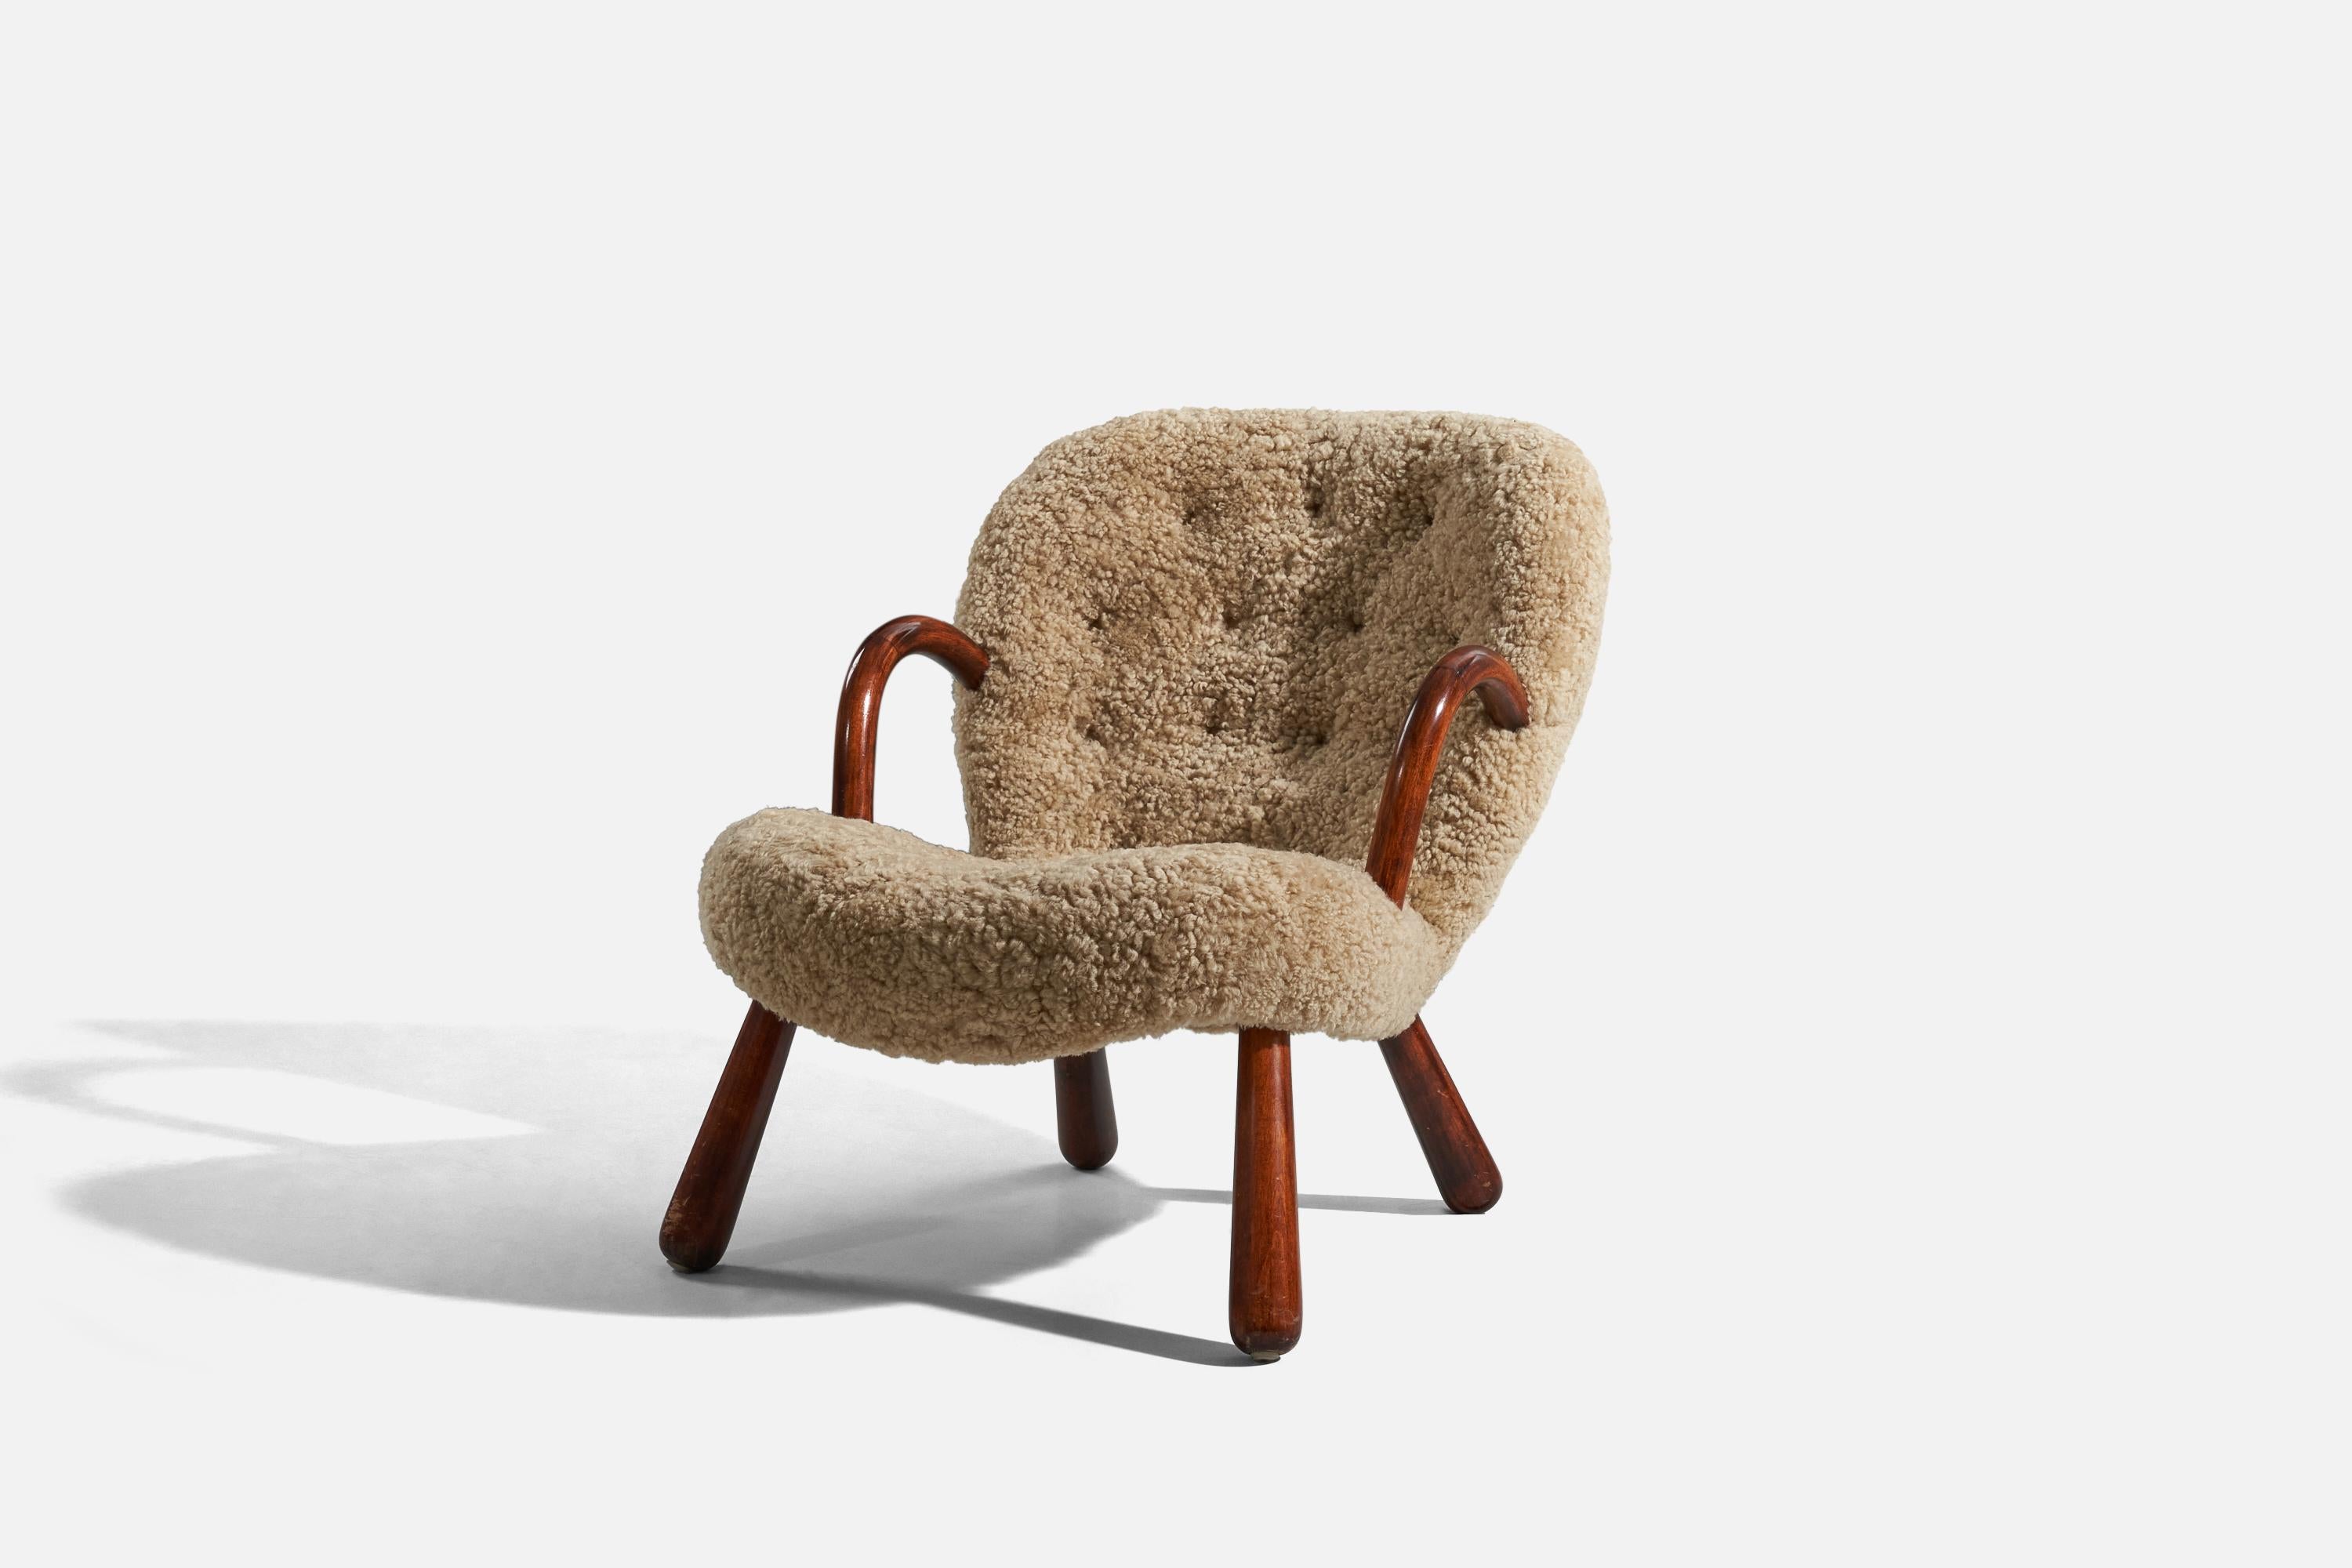 A sheepskin and wood lounge chair designed by Arnold Madsen and produced in Denmark, 1950s.